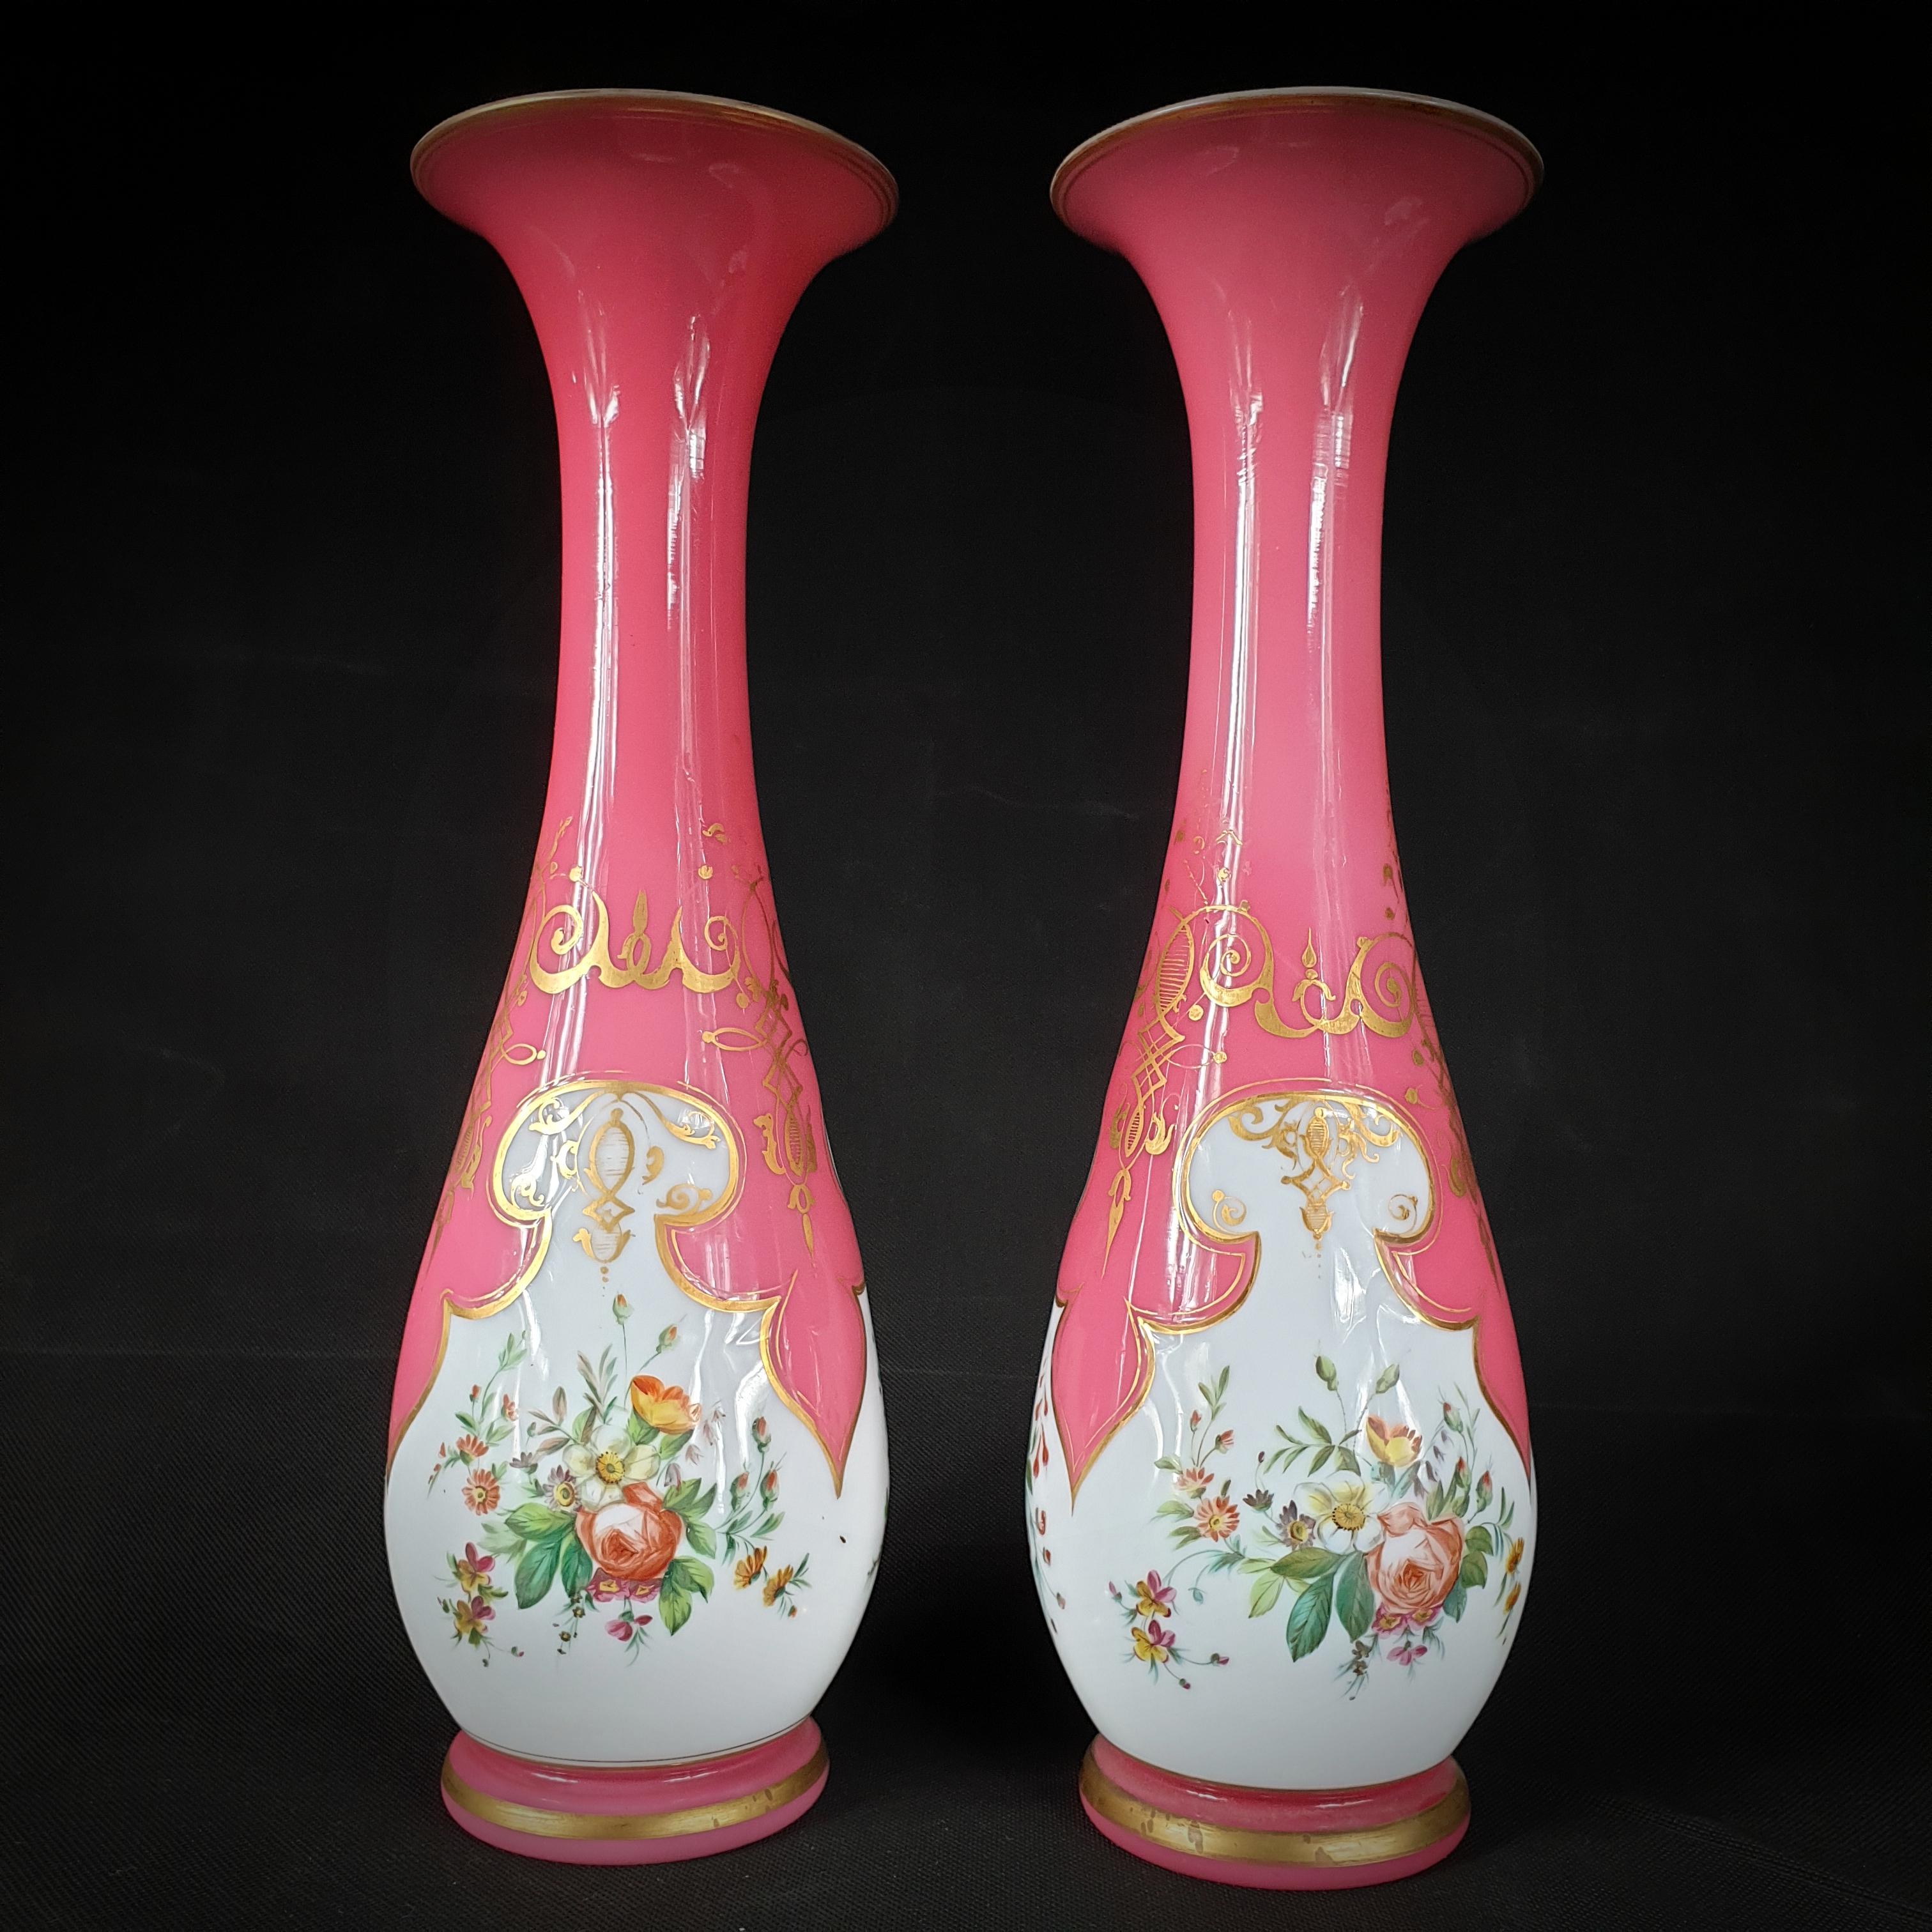 Bring a touch of vintage charm to your living space by bringing home this remarkable pair of opaline glass vases! These translucent drop-shaped vases, handcrafted in France between 1850 and 1900, have an enchanting white paint finish and are